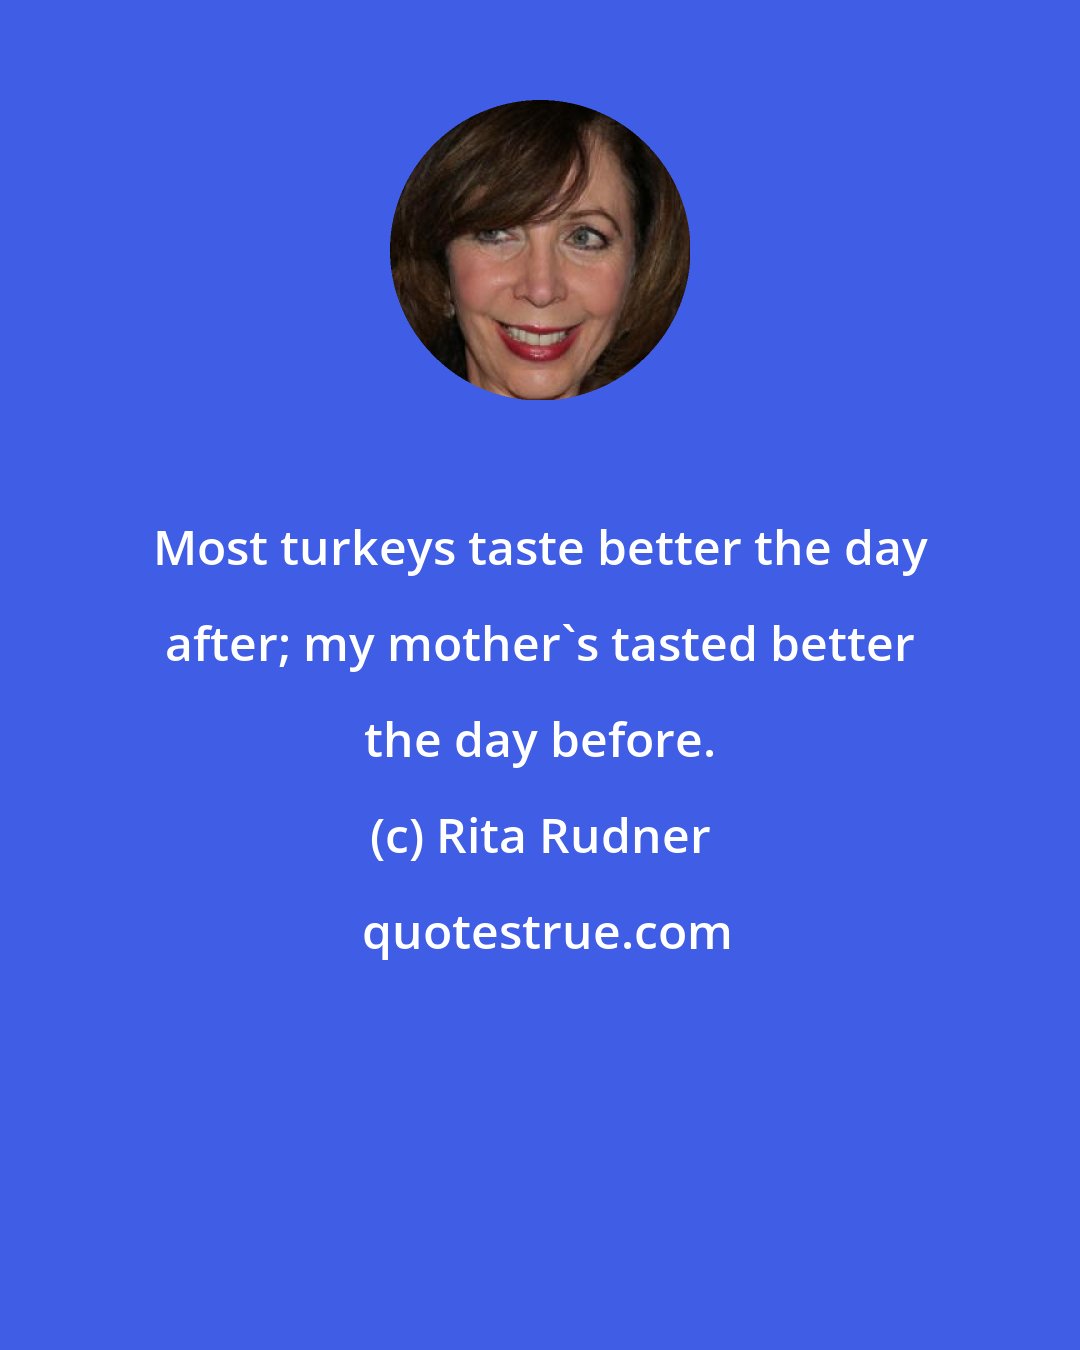 Rita Rudner: Most turkeys taste better the day after; my mother's tasted better the day before.